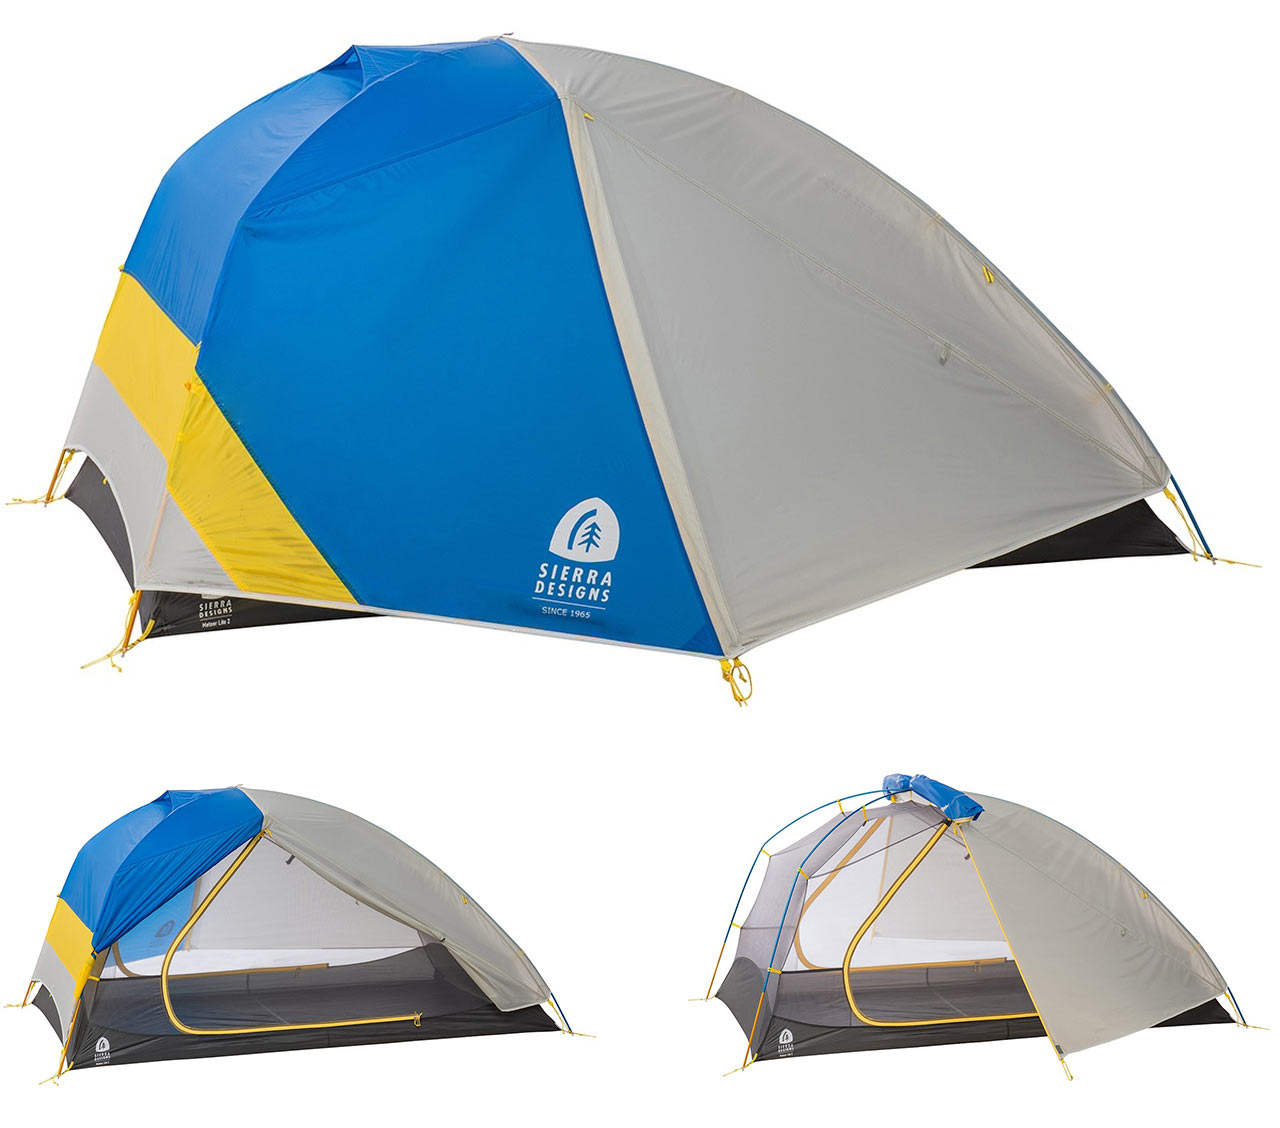 sierra designs meteor lite 2 lightweight 2person tent for bikepacking and hiking overnight camping trips